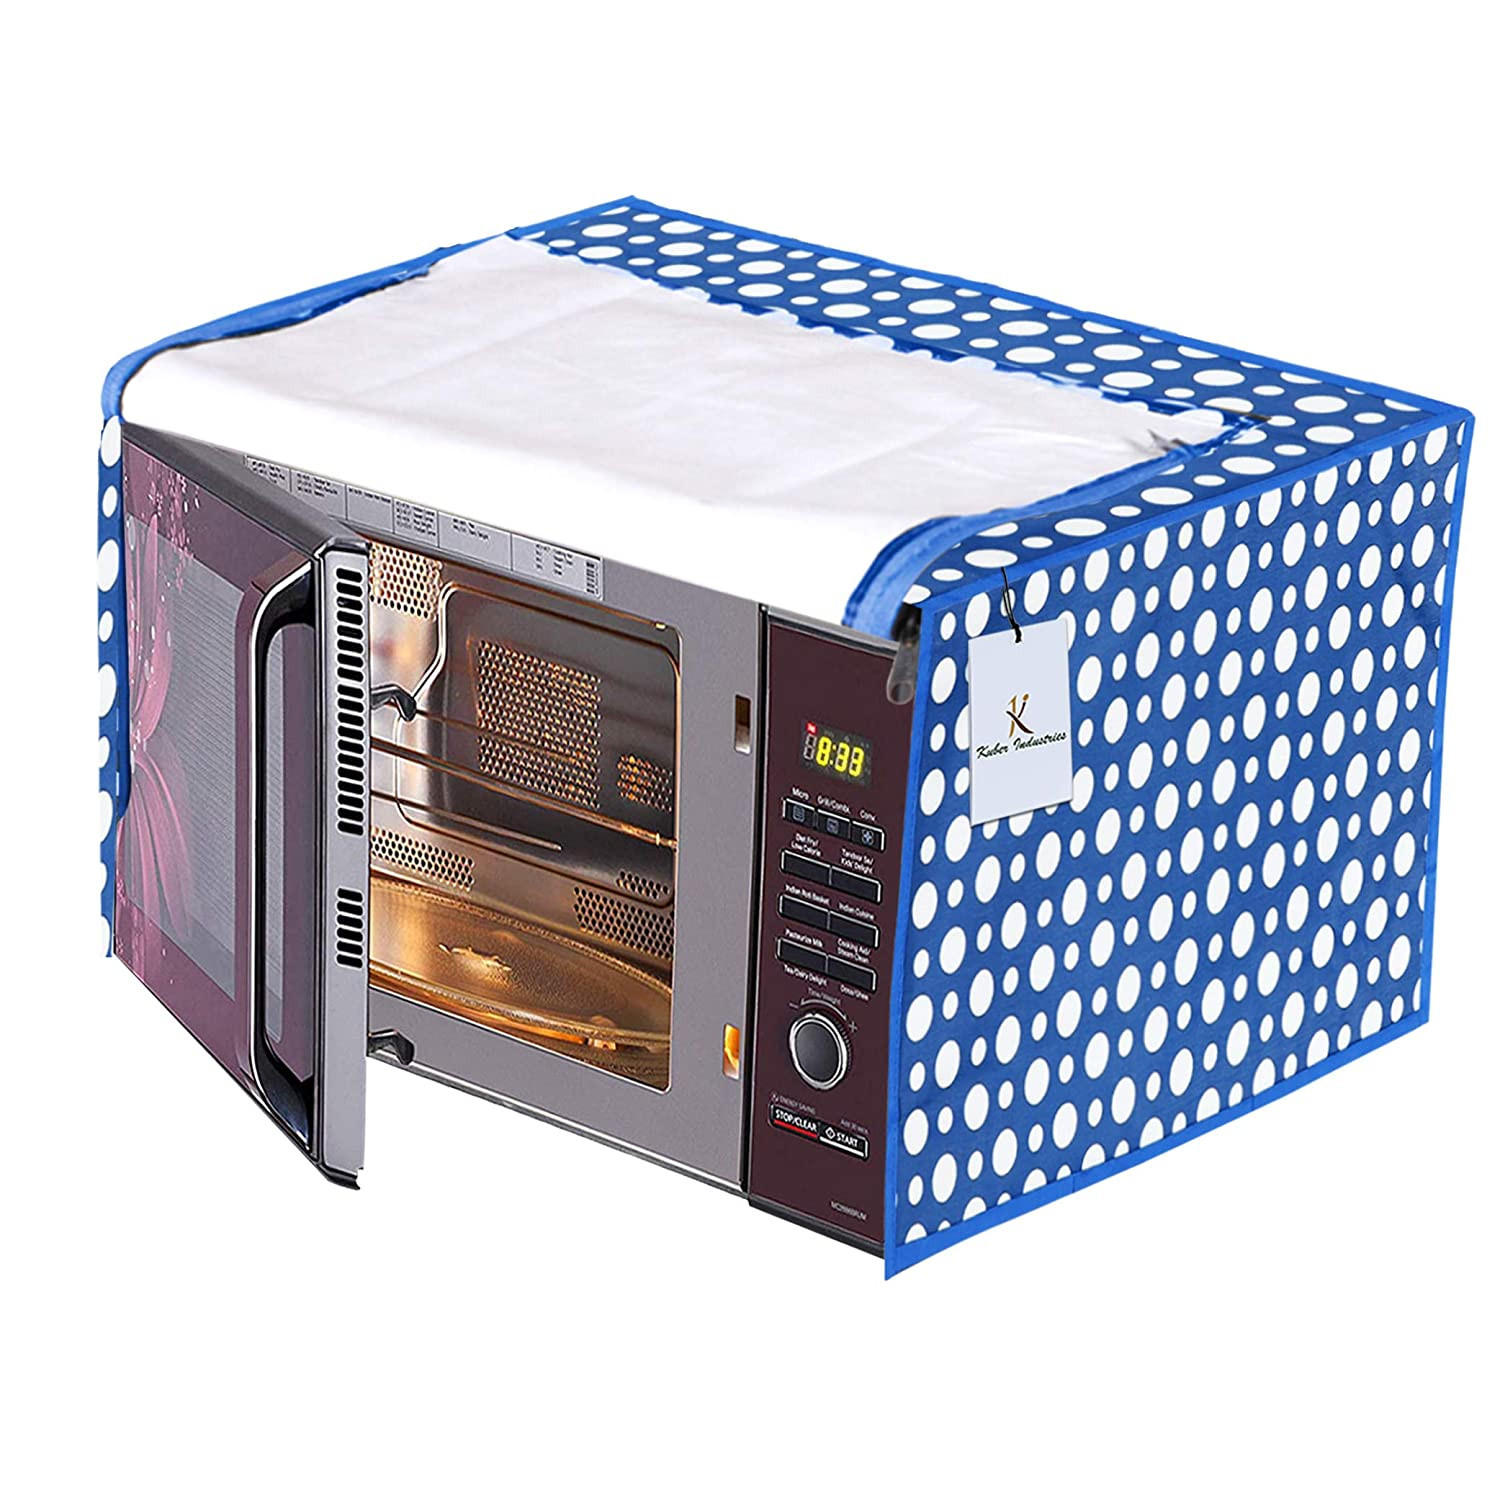 Kuber Industries PVC Dot Printed Microwave Oven Cover,20 Ltr. (Blue)-HS43KUBMART26017